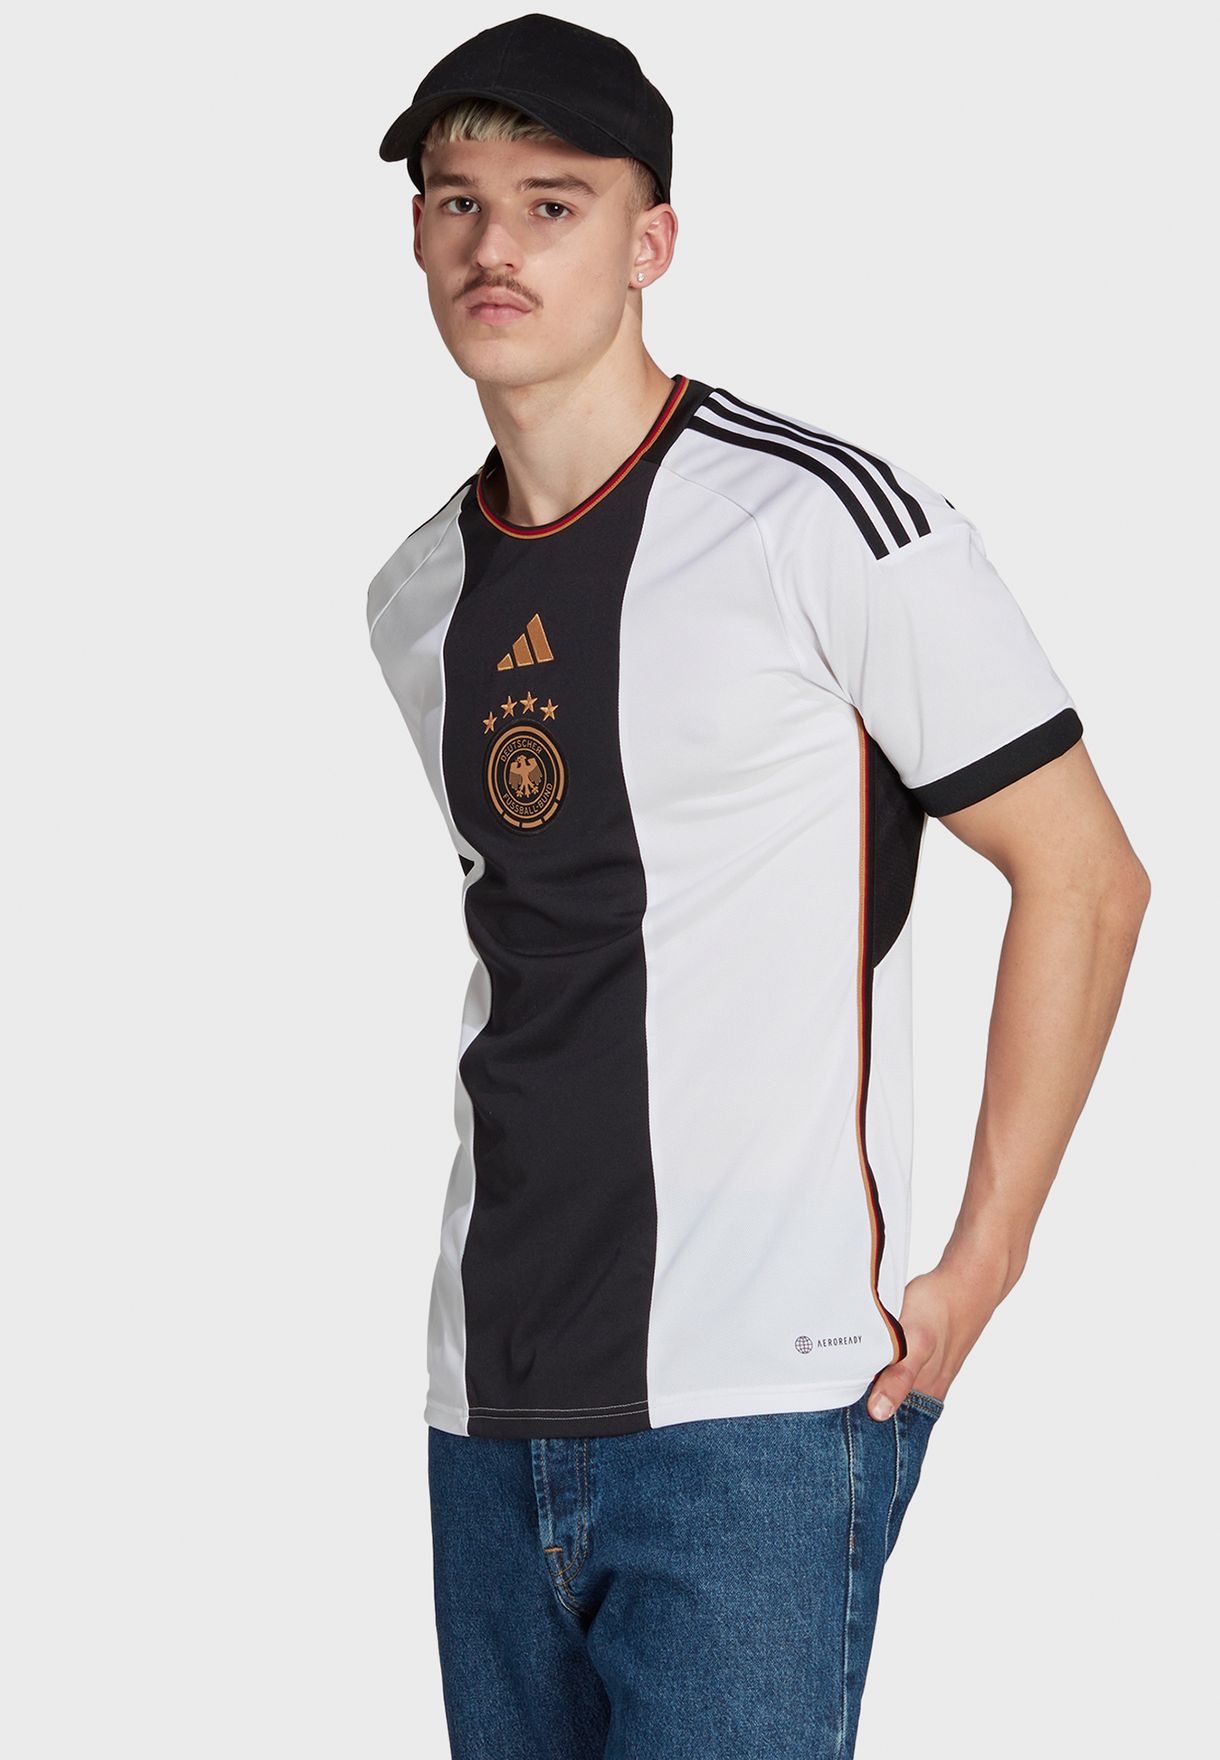 Germany Home Jersey